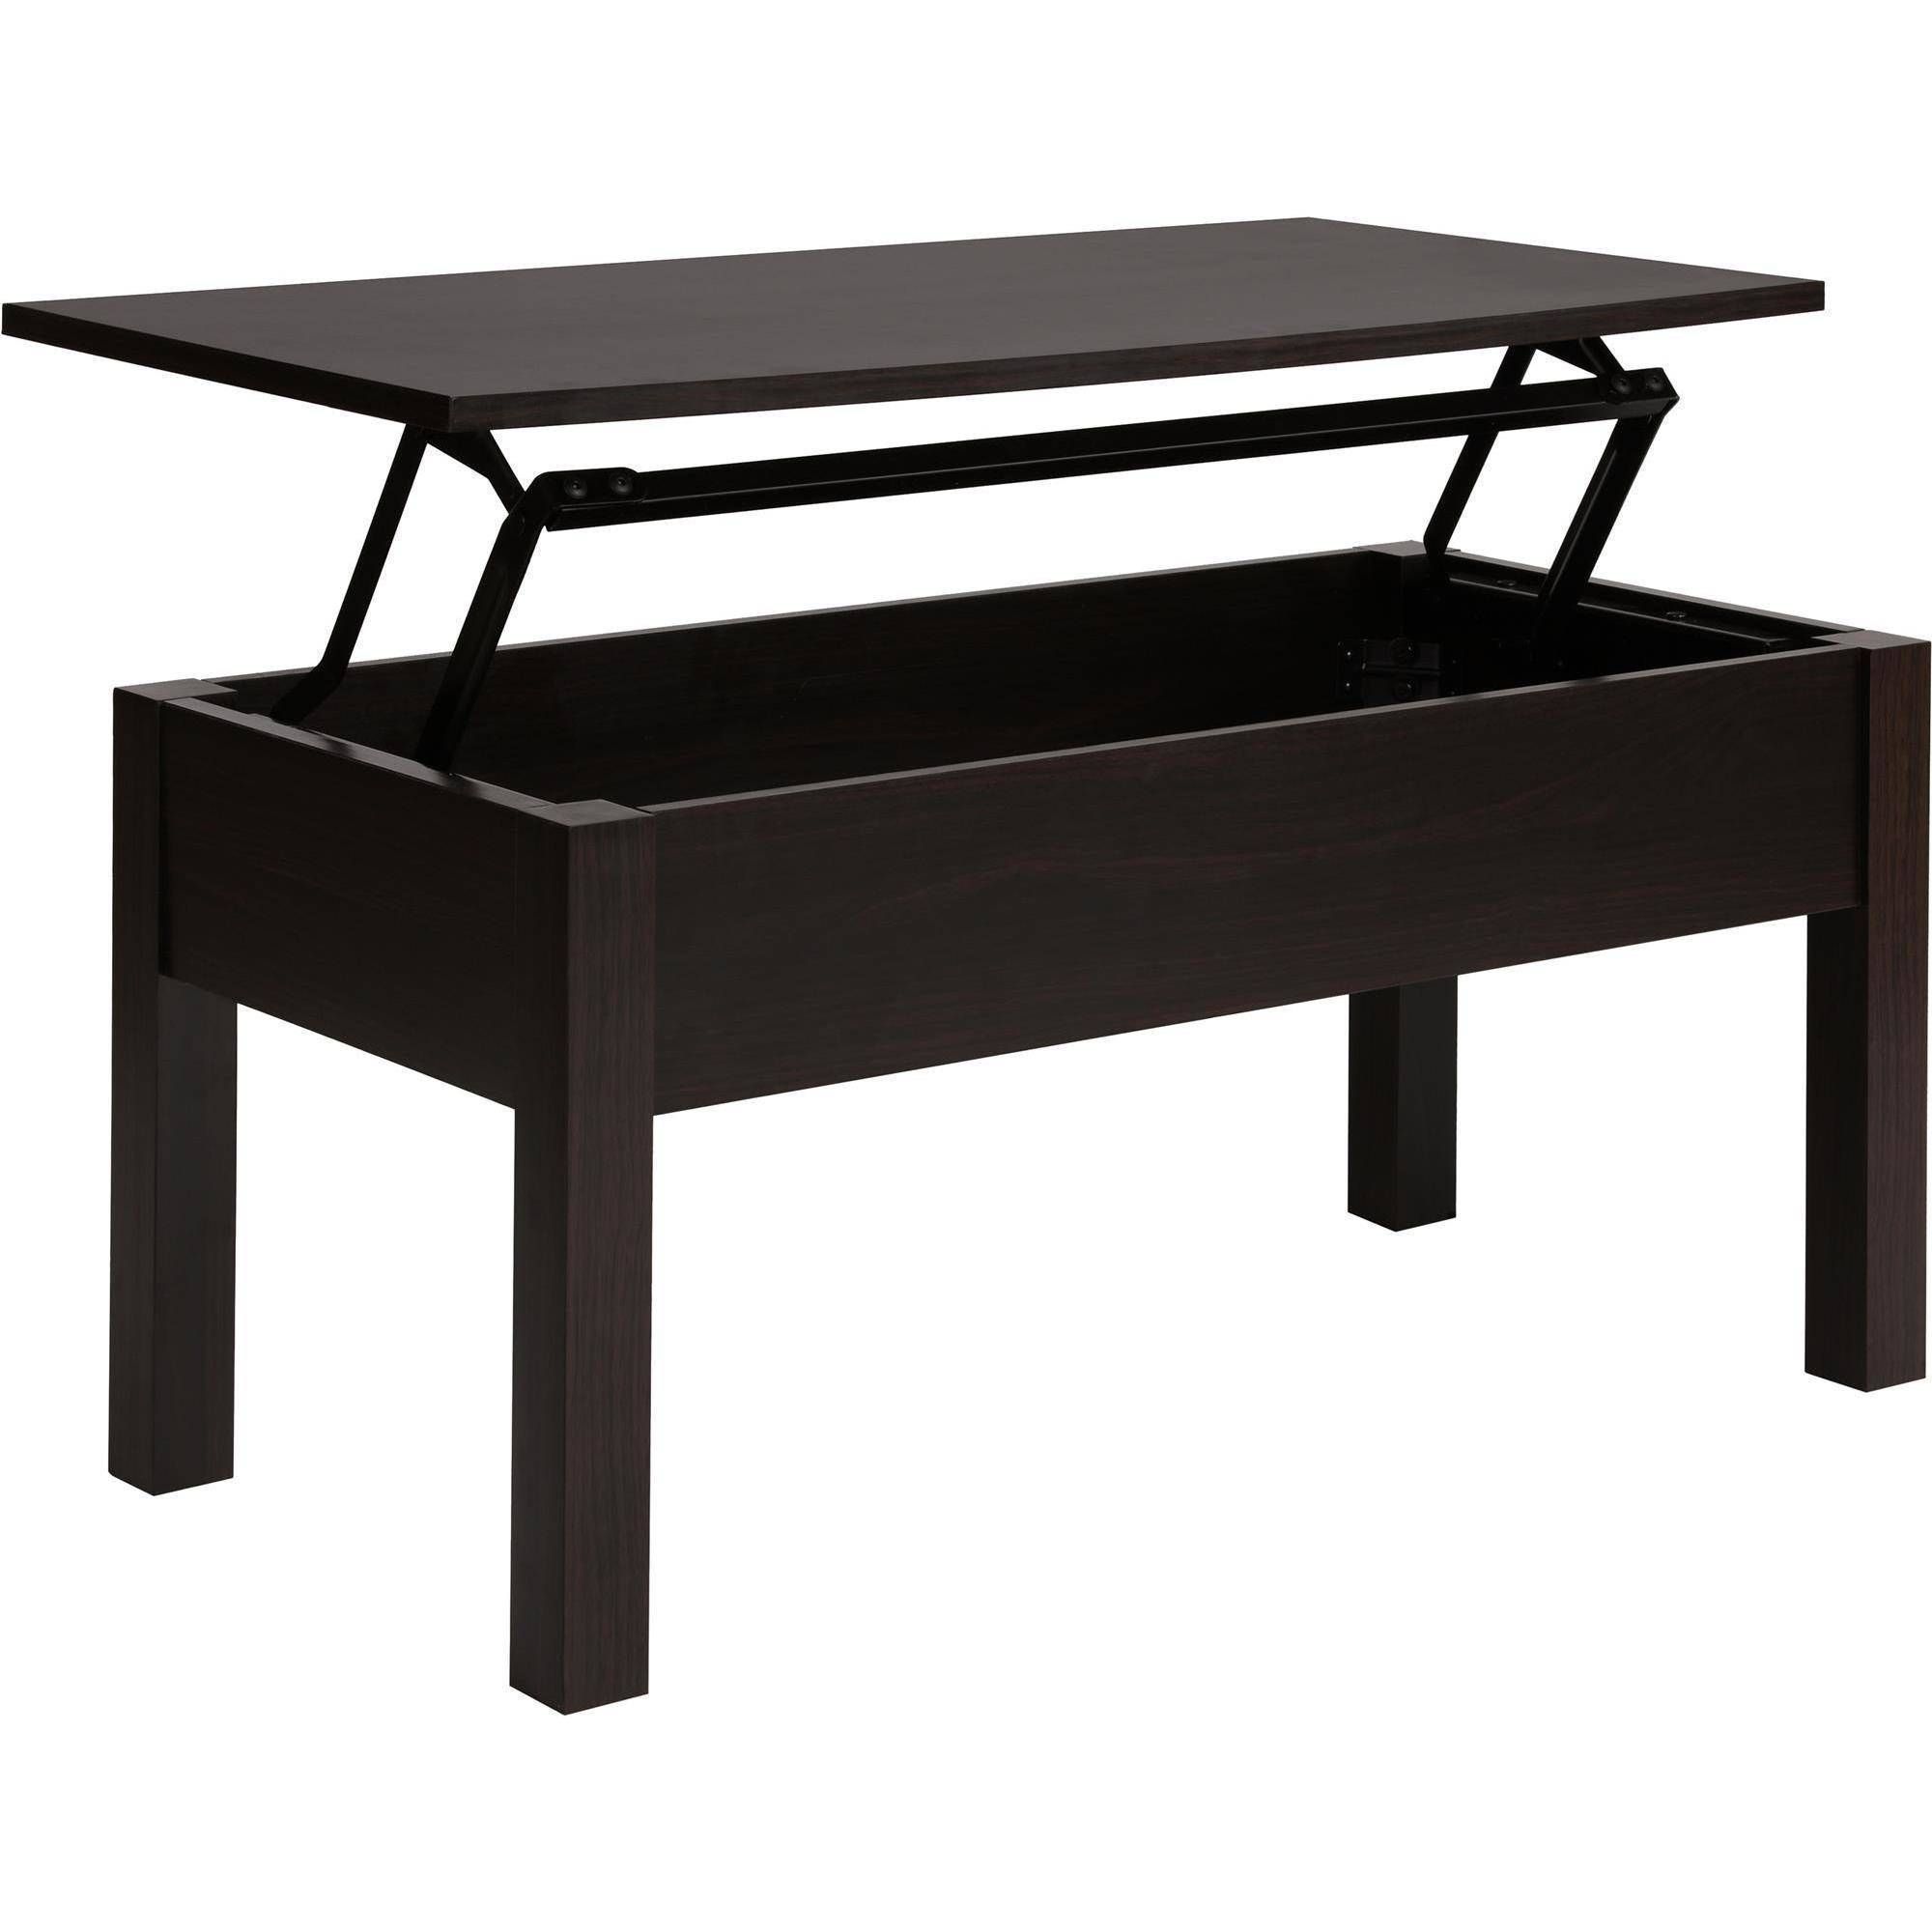 Mainstays Lift Top Coffee Table, Multiple Colors – Walmart In Glass Lift Top Coffee Tables (View 15 of 30)